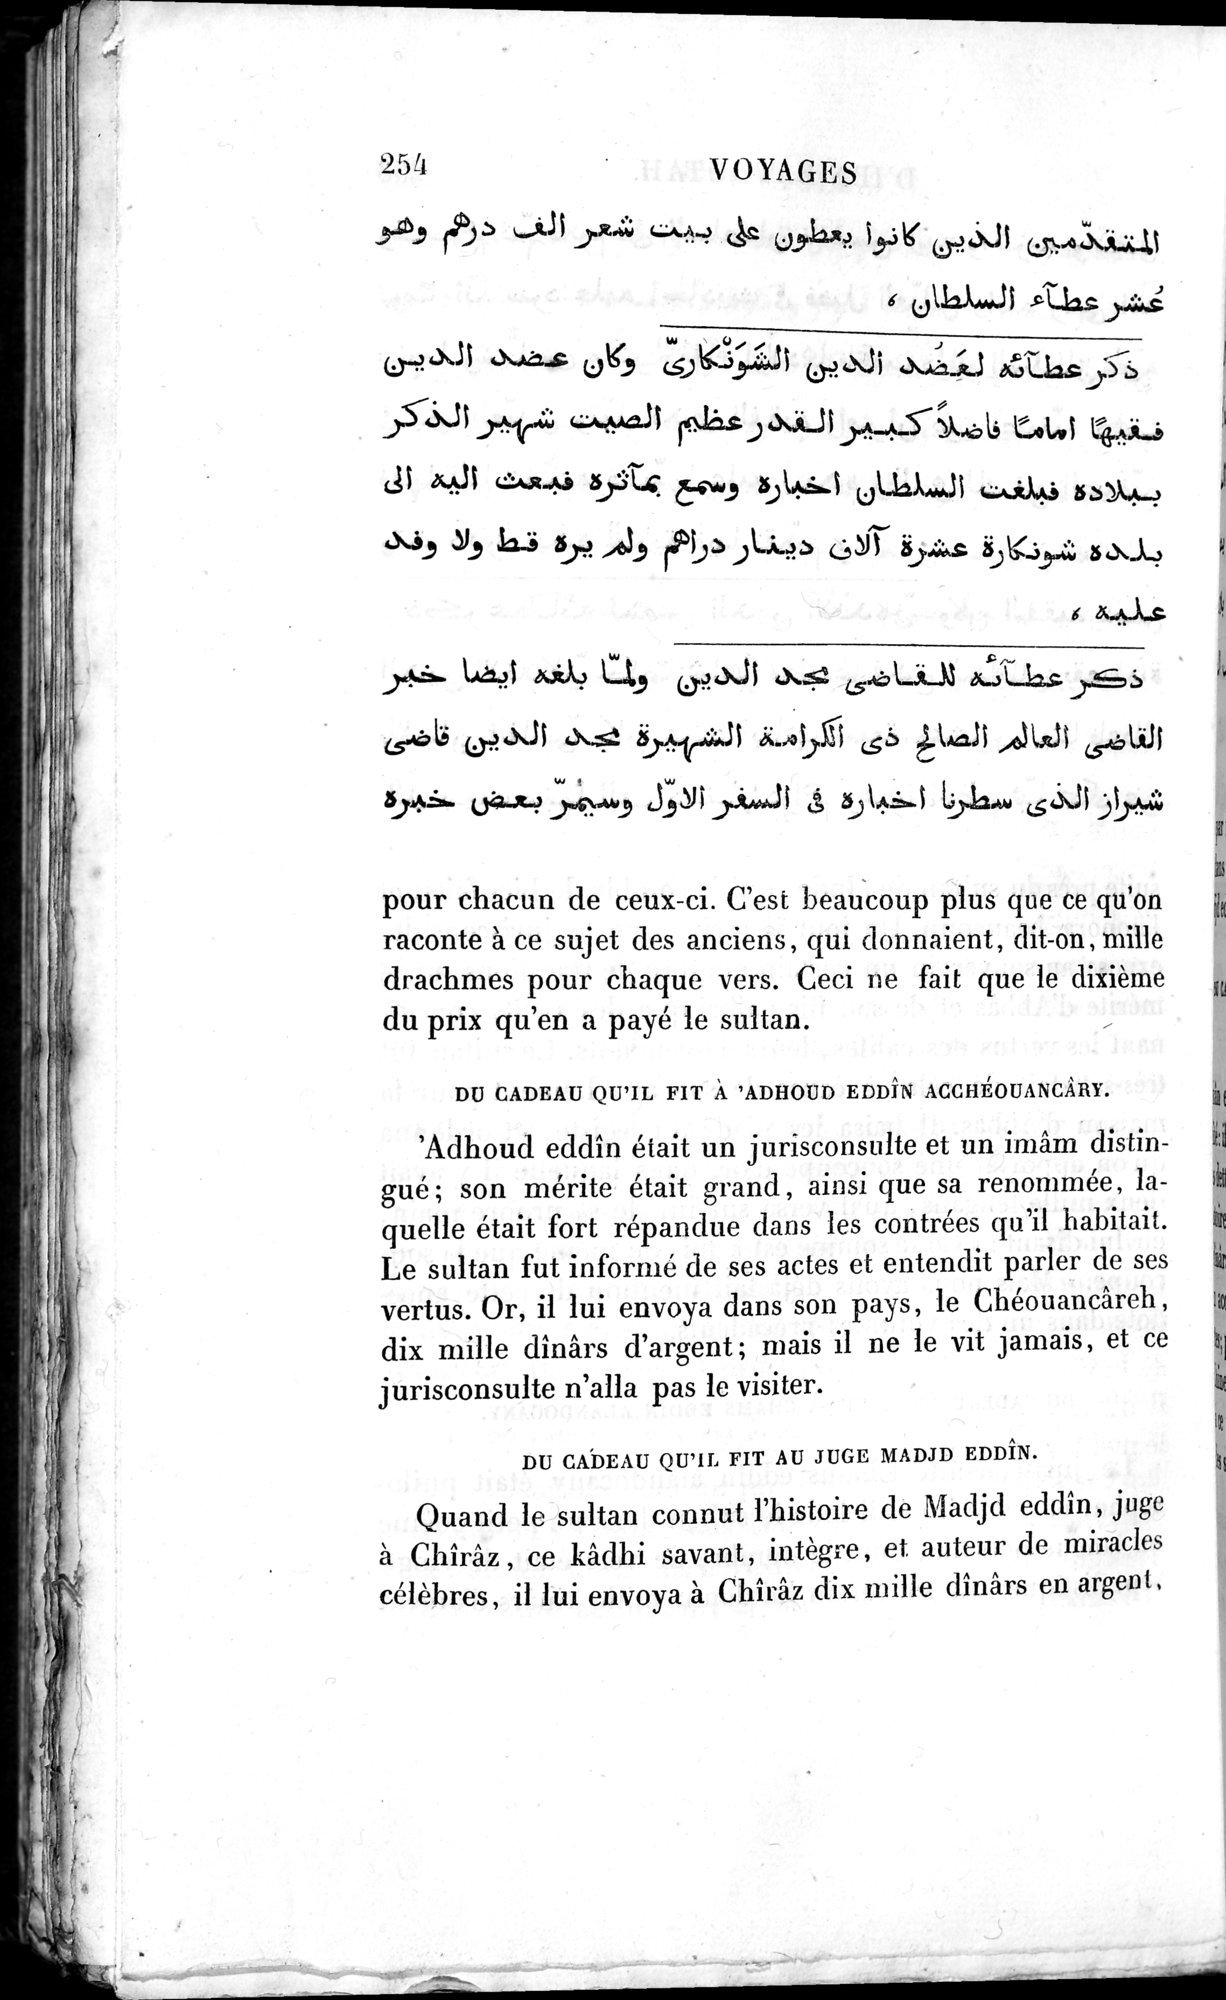 Voyages d'Ibn Batoutah : vol.3 / Page 294 (Grayscale High Resolution Image)